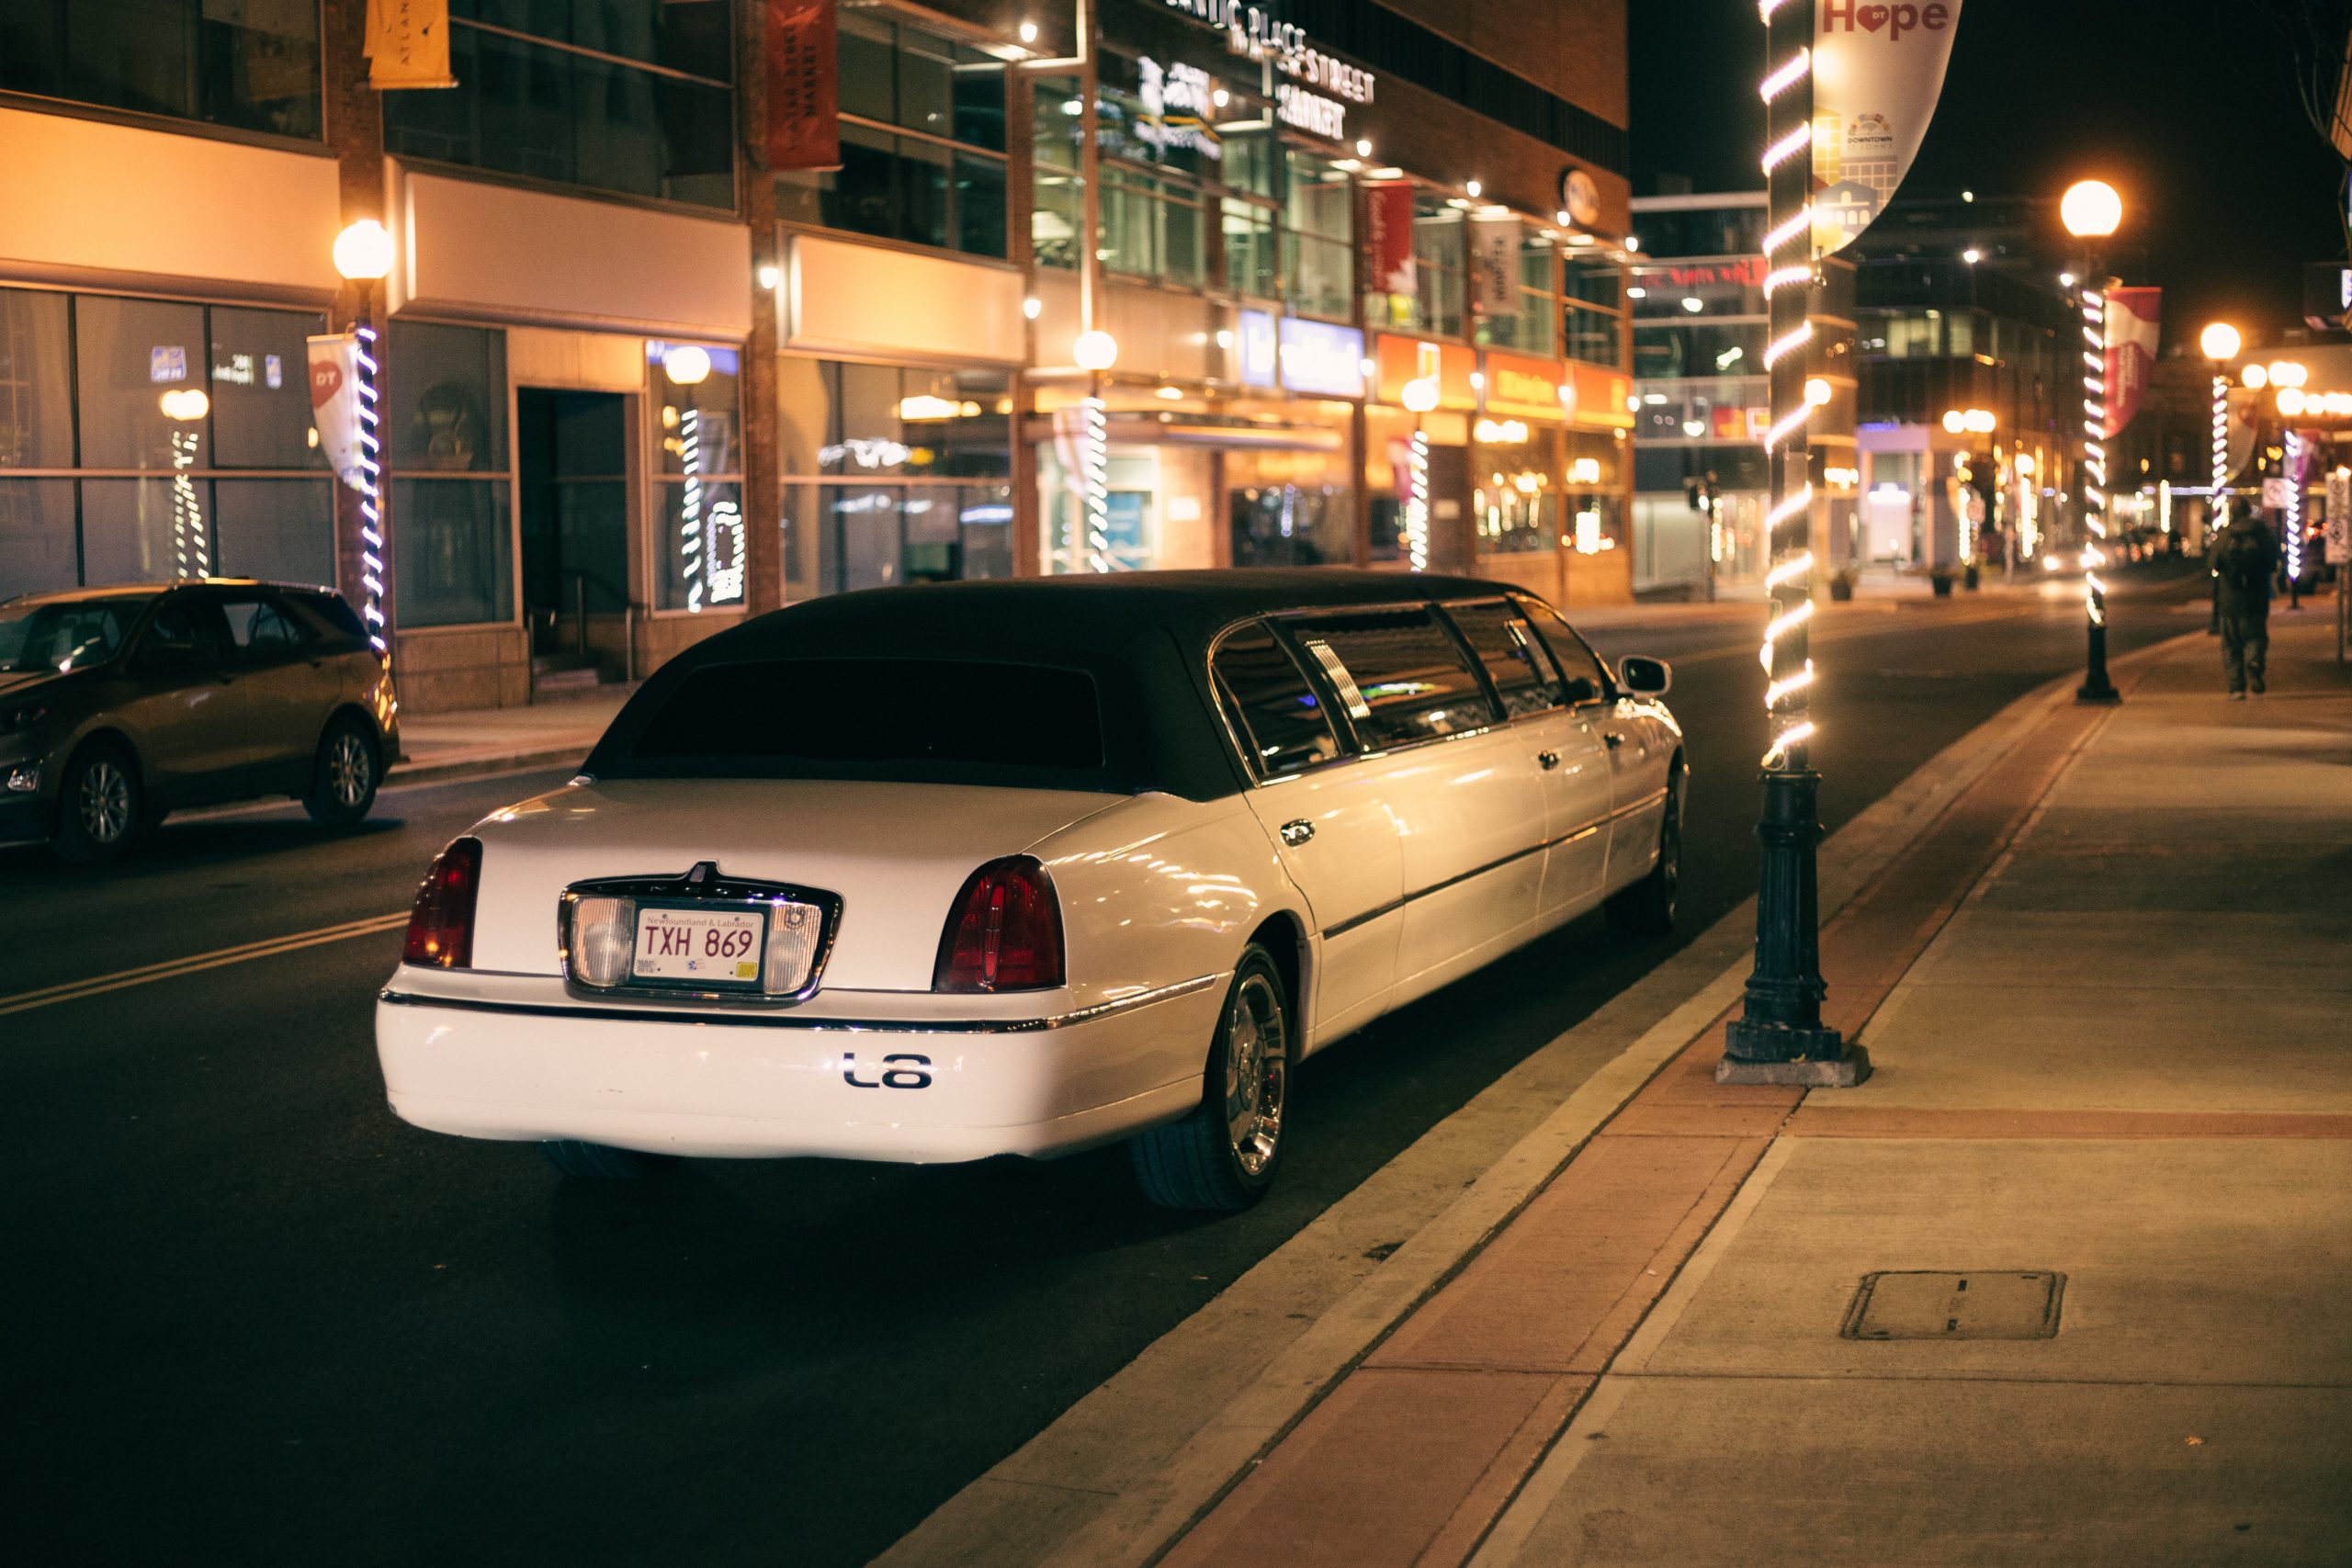 a limousine parked at the street side during night